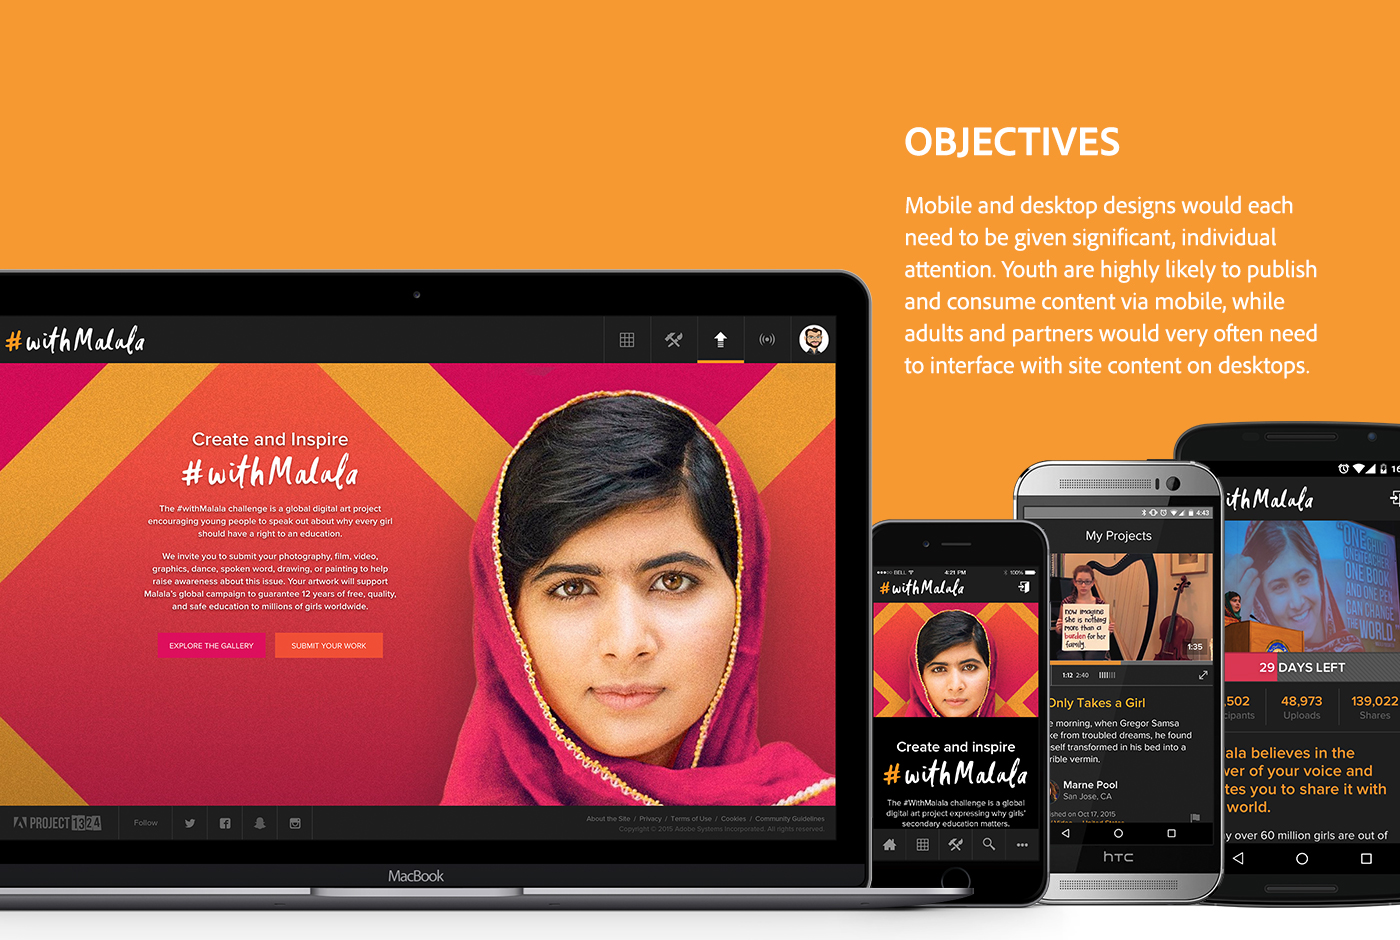 adobe Project 1324 withMalala wrecking ball Get Wrecked sundance national geographic development cms design UI ux interactive installation